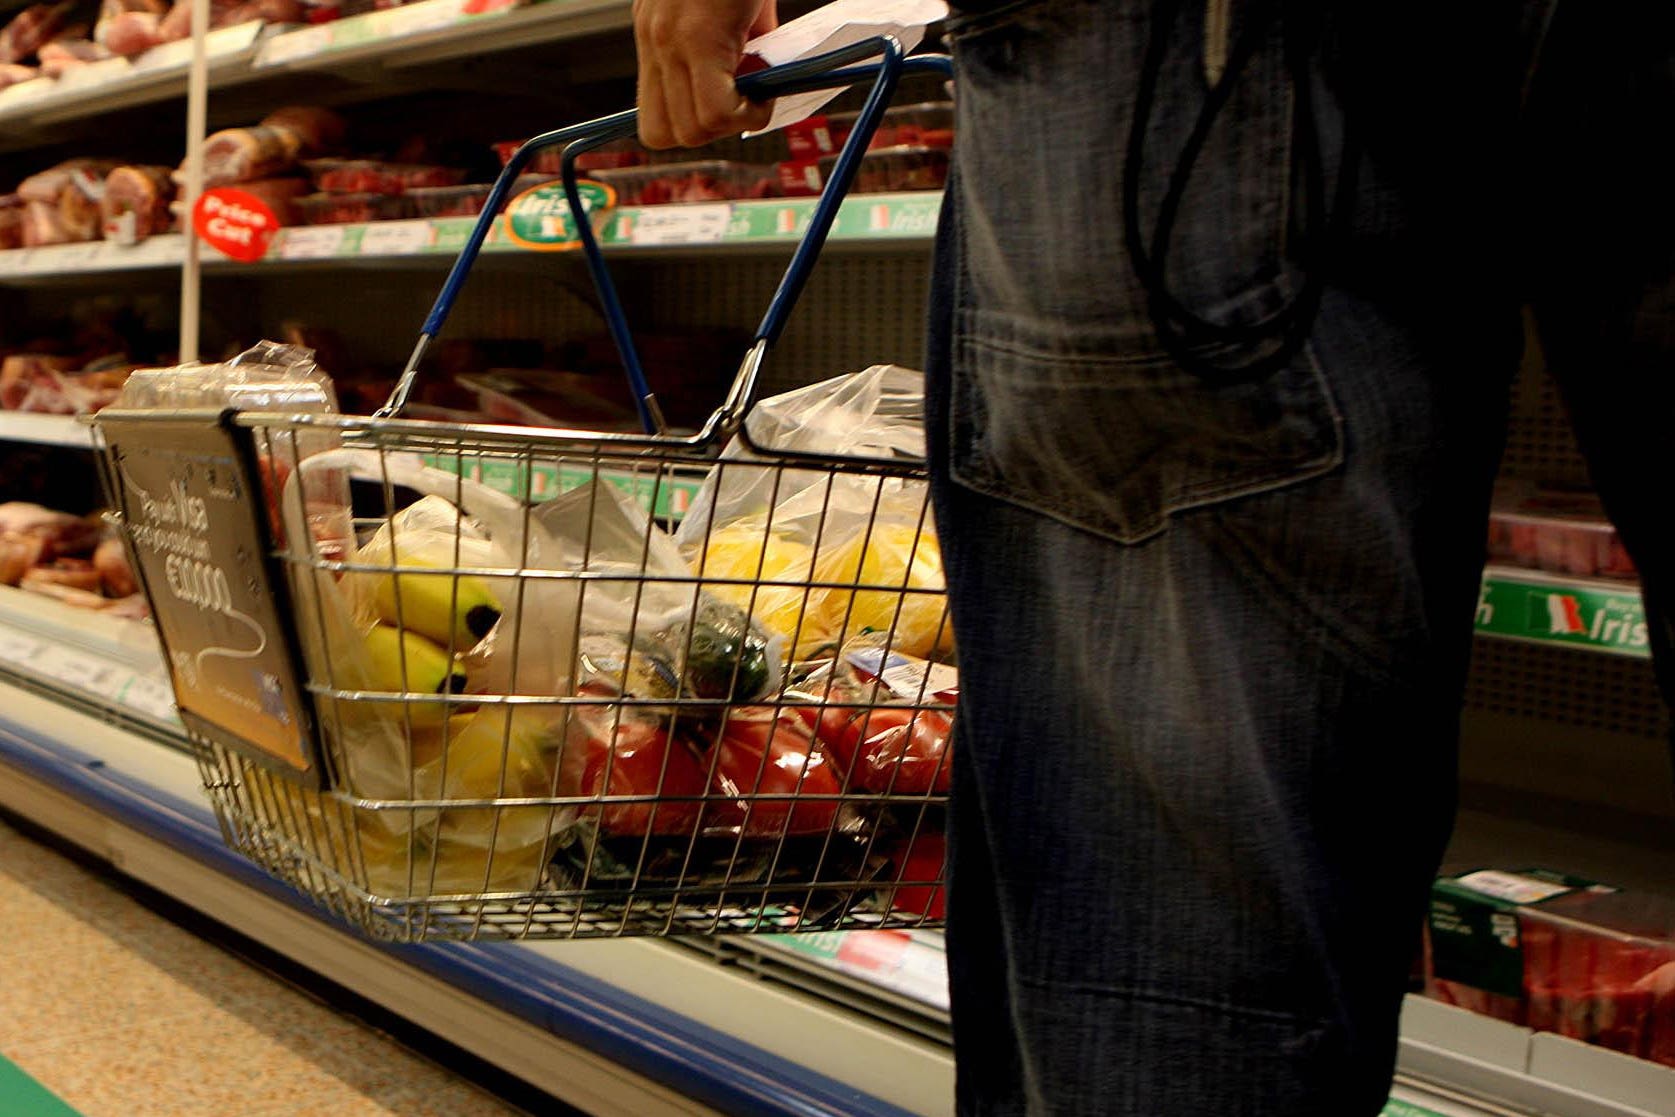 The SNP has proposed capping basic daily essentials to help with rising prices (Julien Behal/PA)